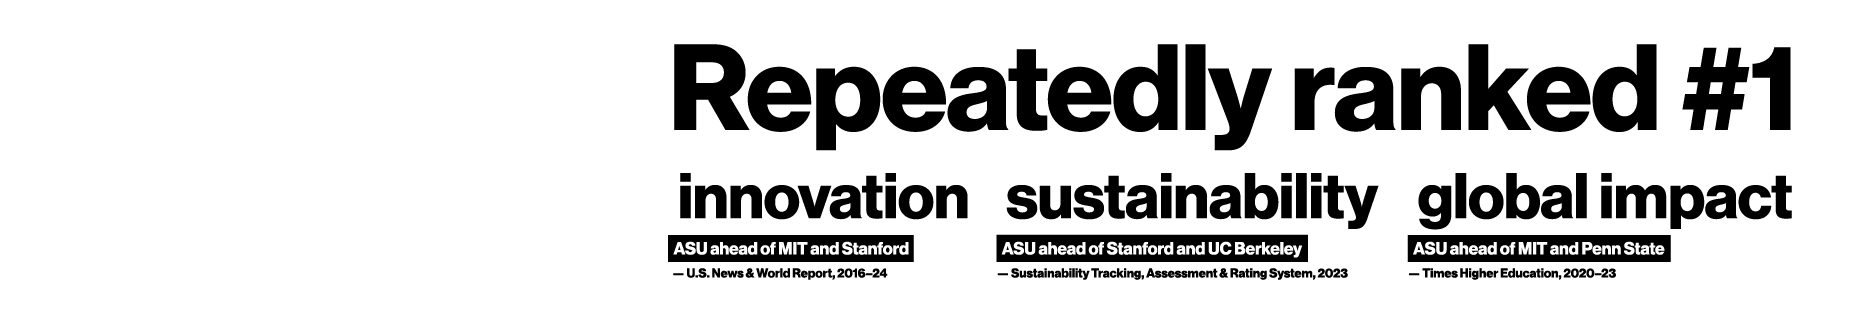 Repeatedly ranked number 1 in innovation, sustainability and global impact